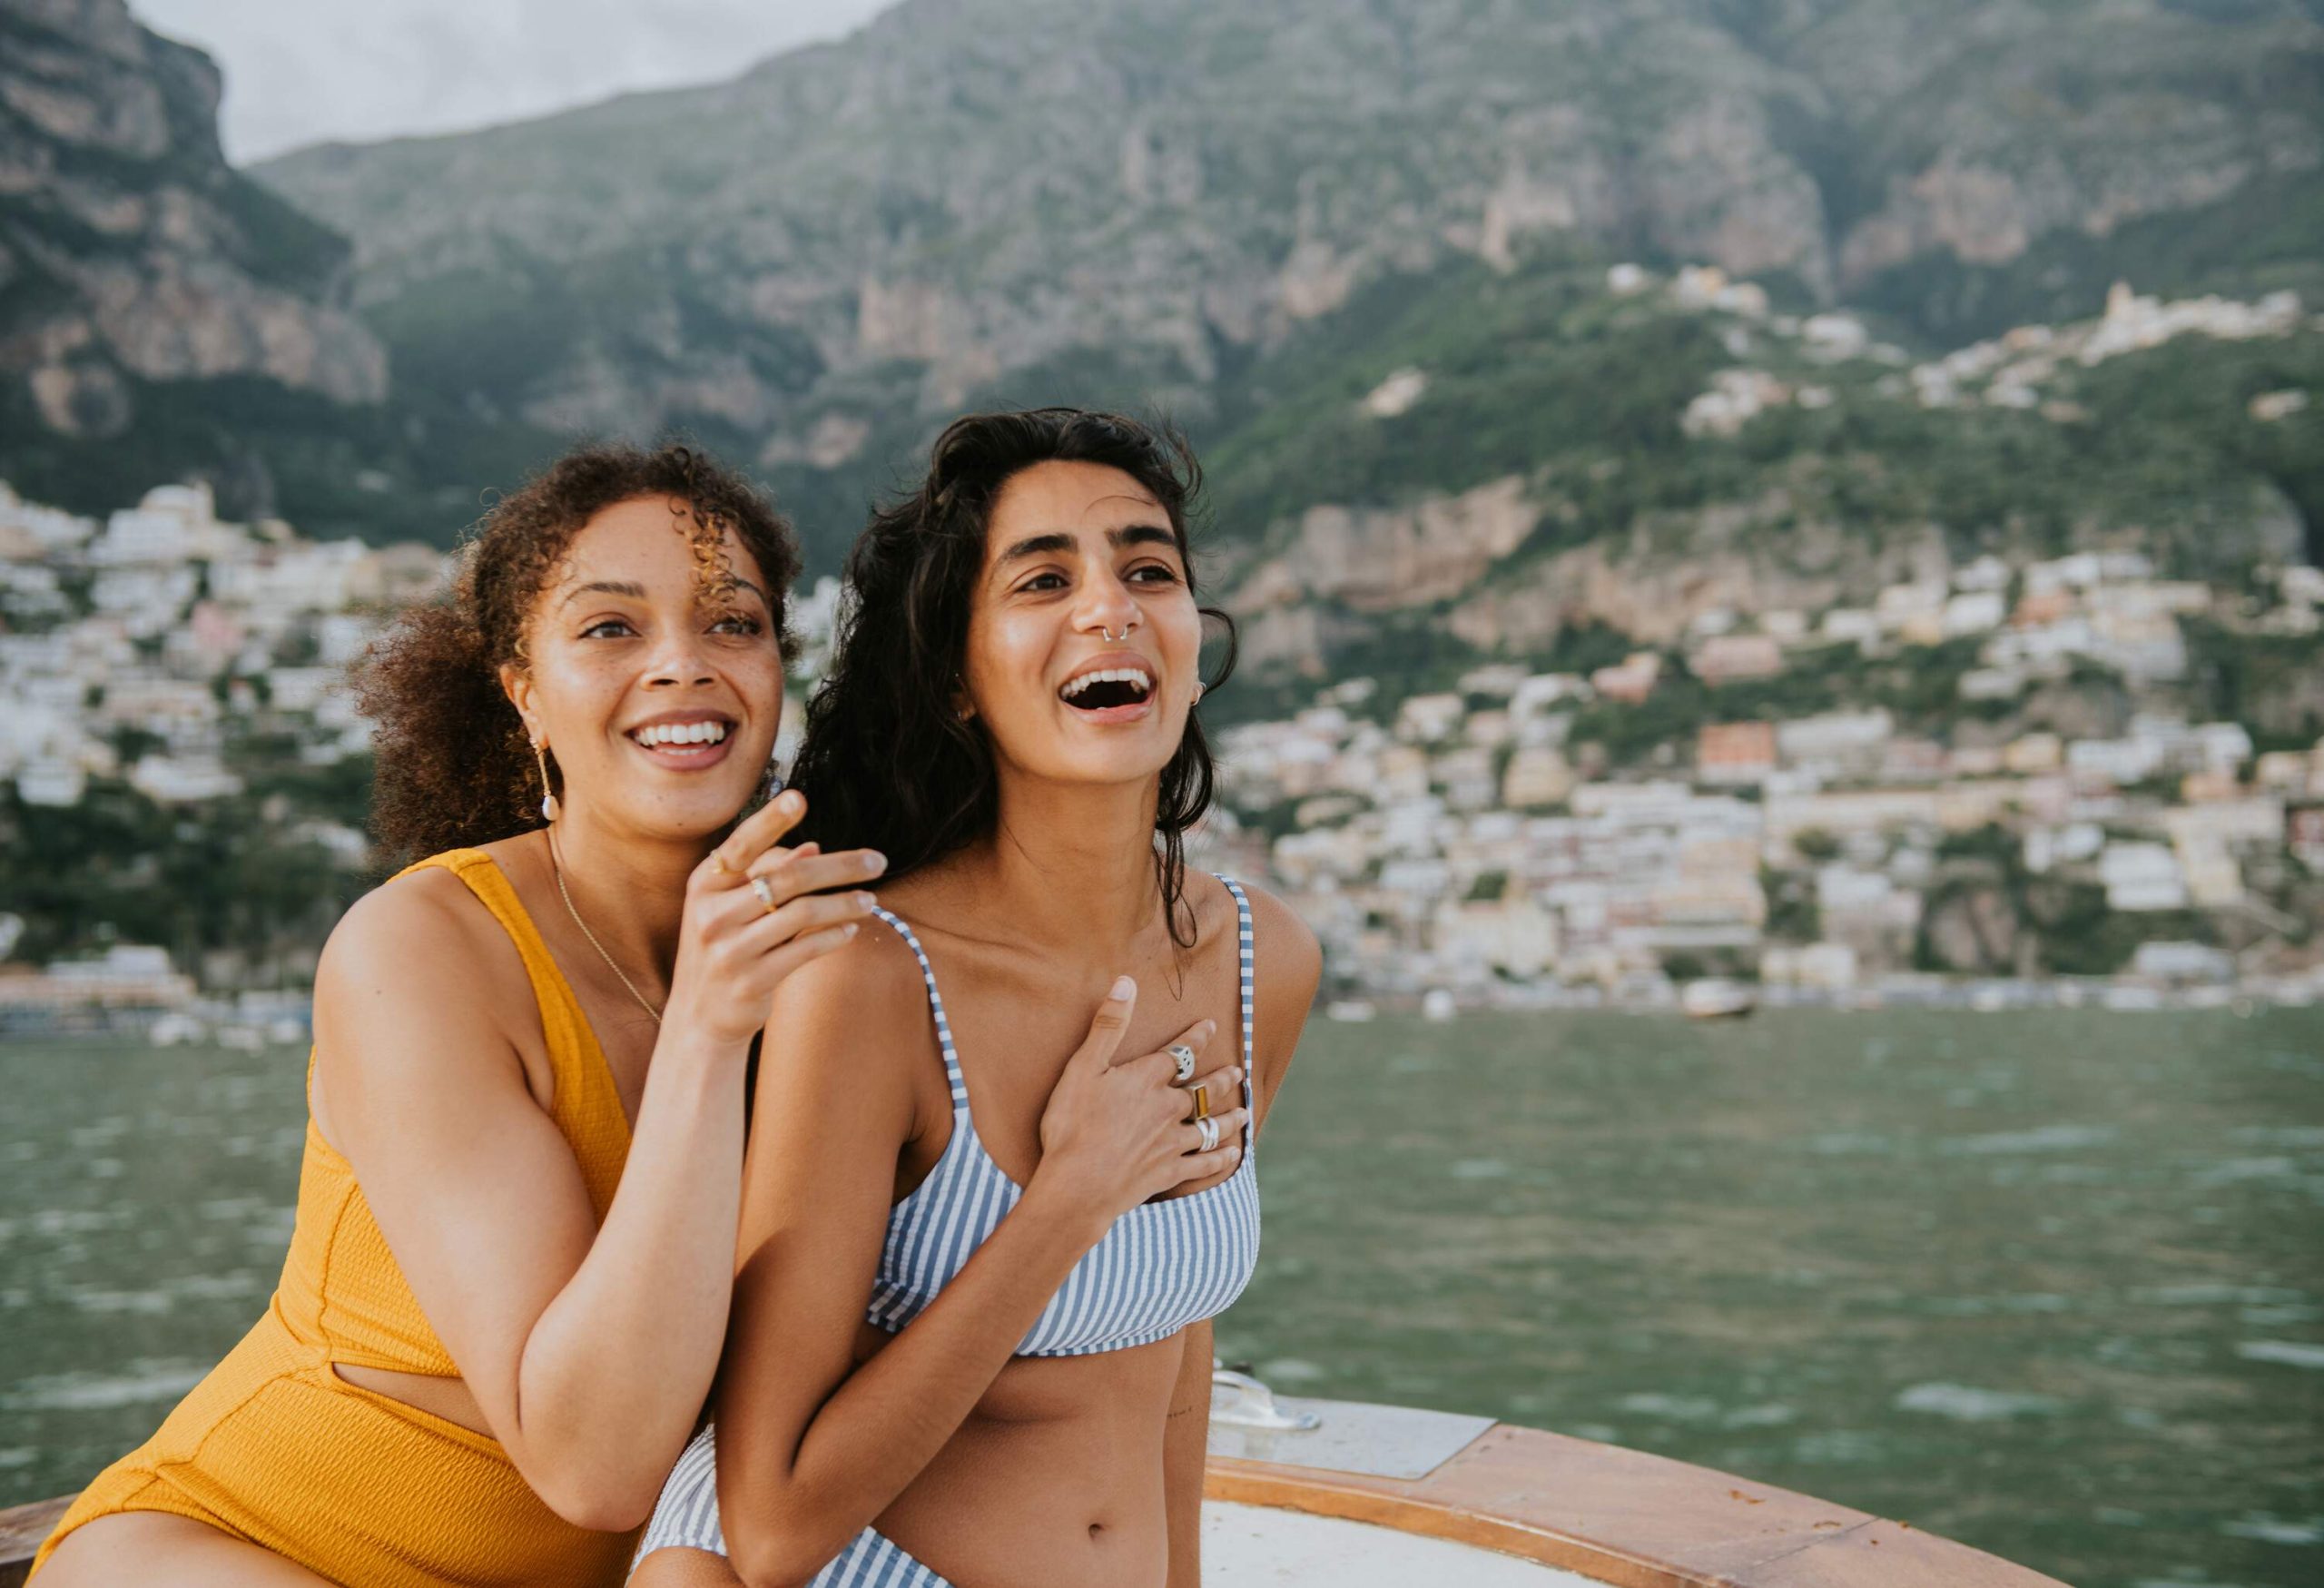 dest_italy_amalfi-coast_positano_friends_lgbtq-couple_boat_gettyimages-1495368454_universal_within-usage-period_100810